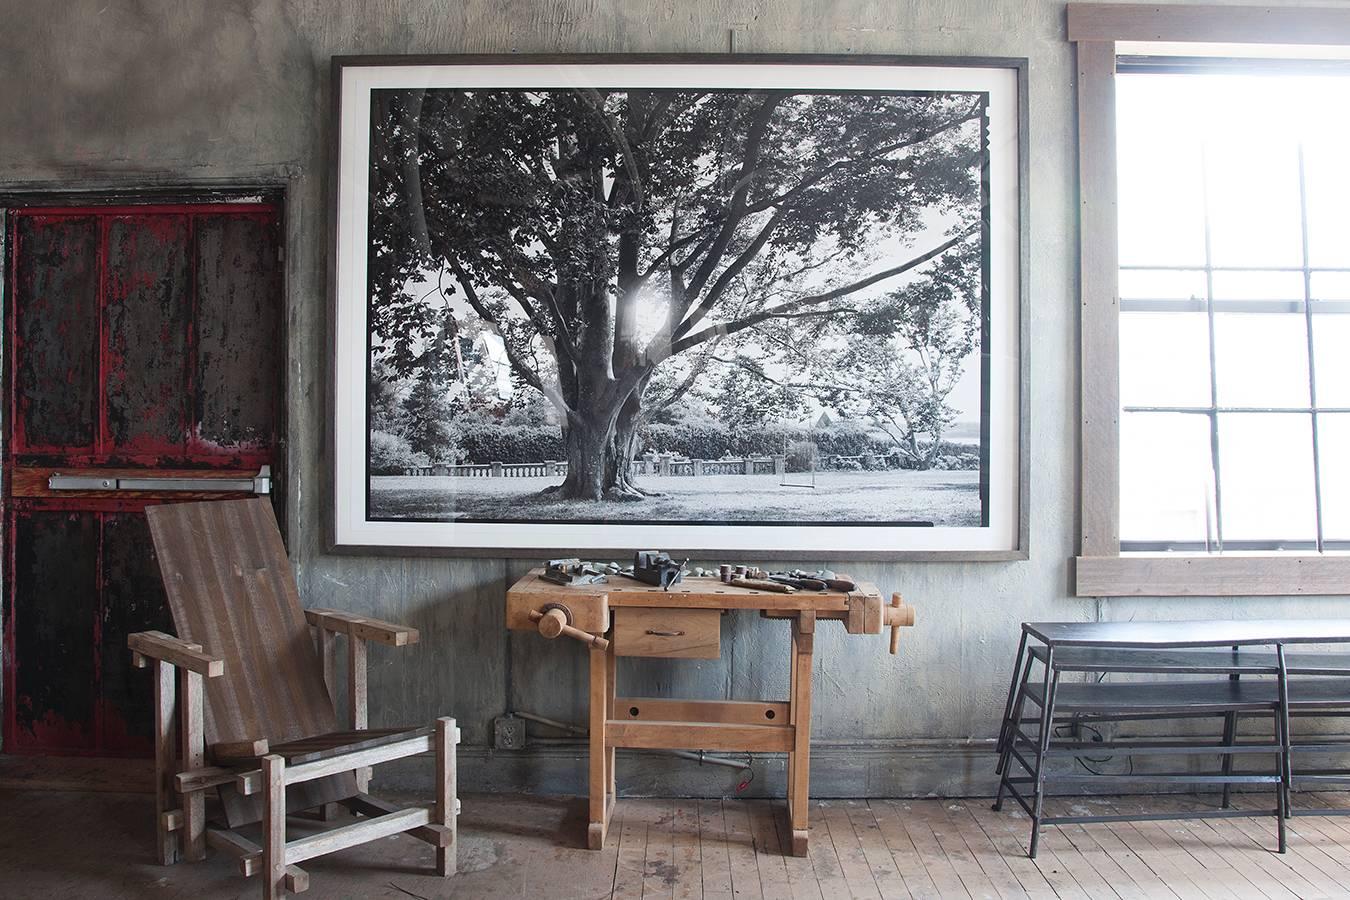 Beautiful black and white framed photograph of a tree in shelter Island by a New York photographer Charles Baker.
Signed limited edition of 10 prints. Can be purchased unframed and in a smaller version.
Please contact us for more information,